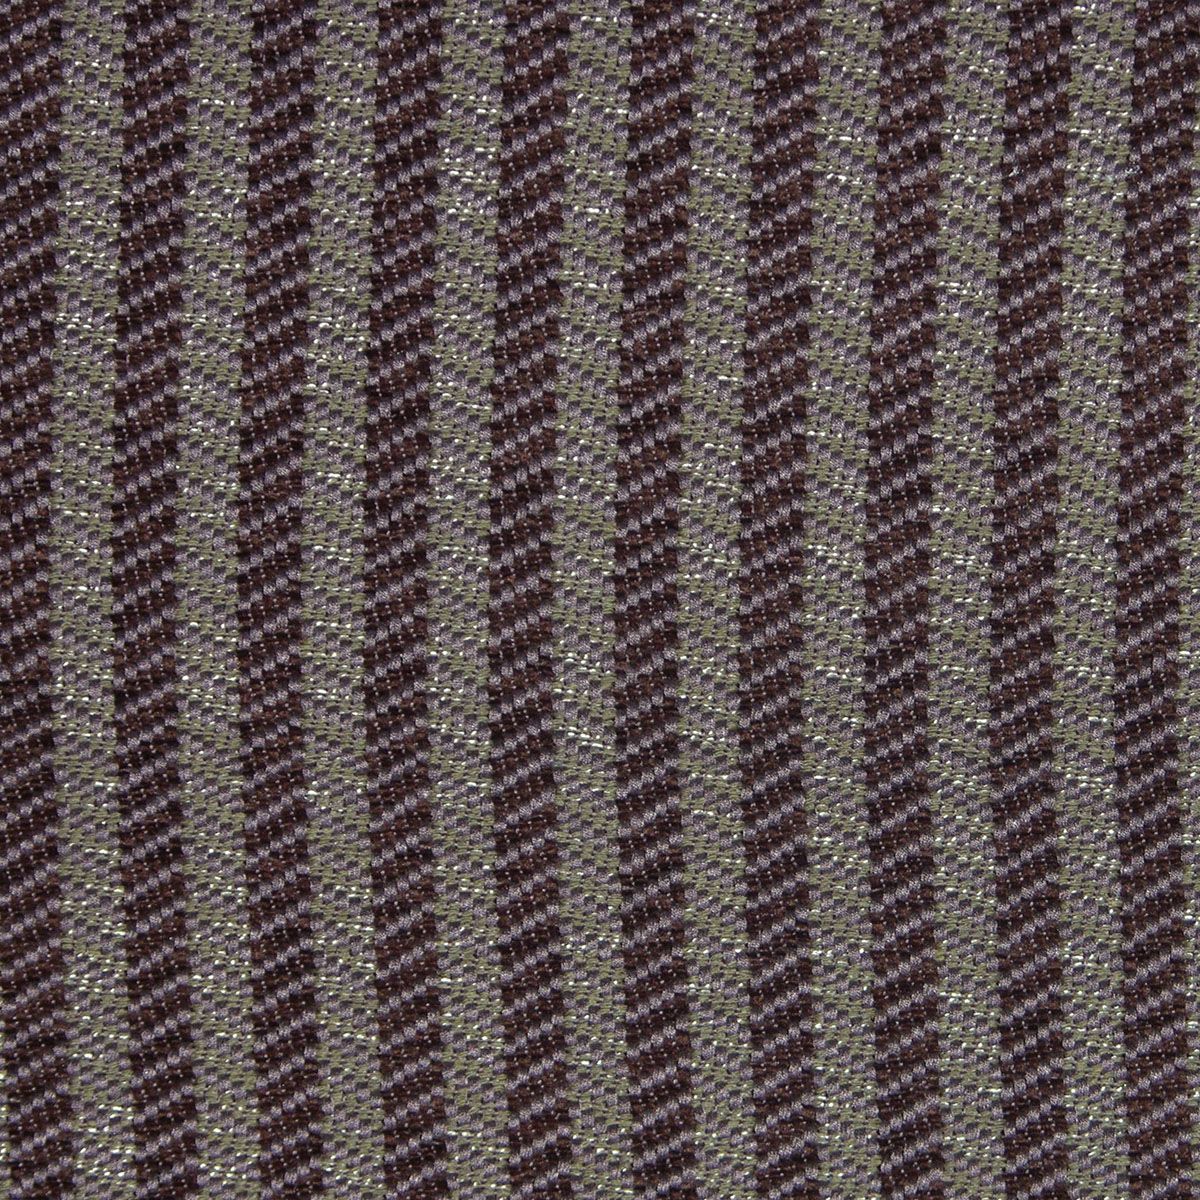 Herring fabric in chocolate color - pattern number VC 00040602 - by Scalamandre in the Old World Weavers collection